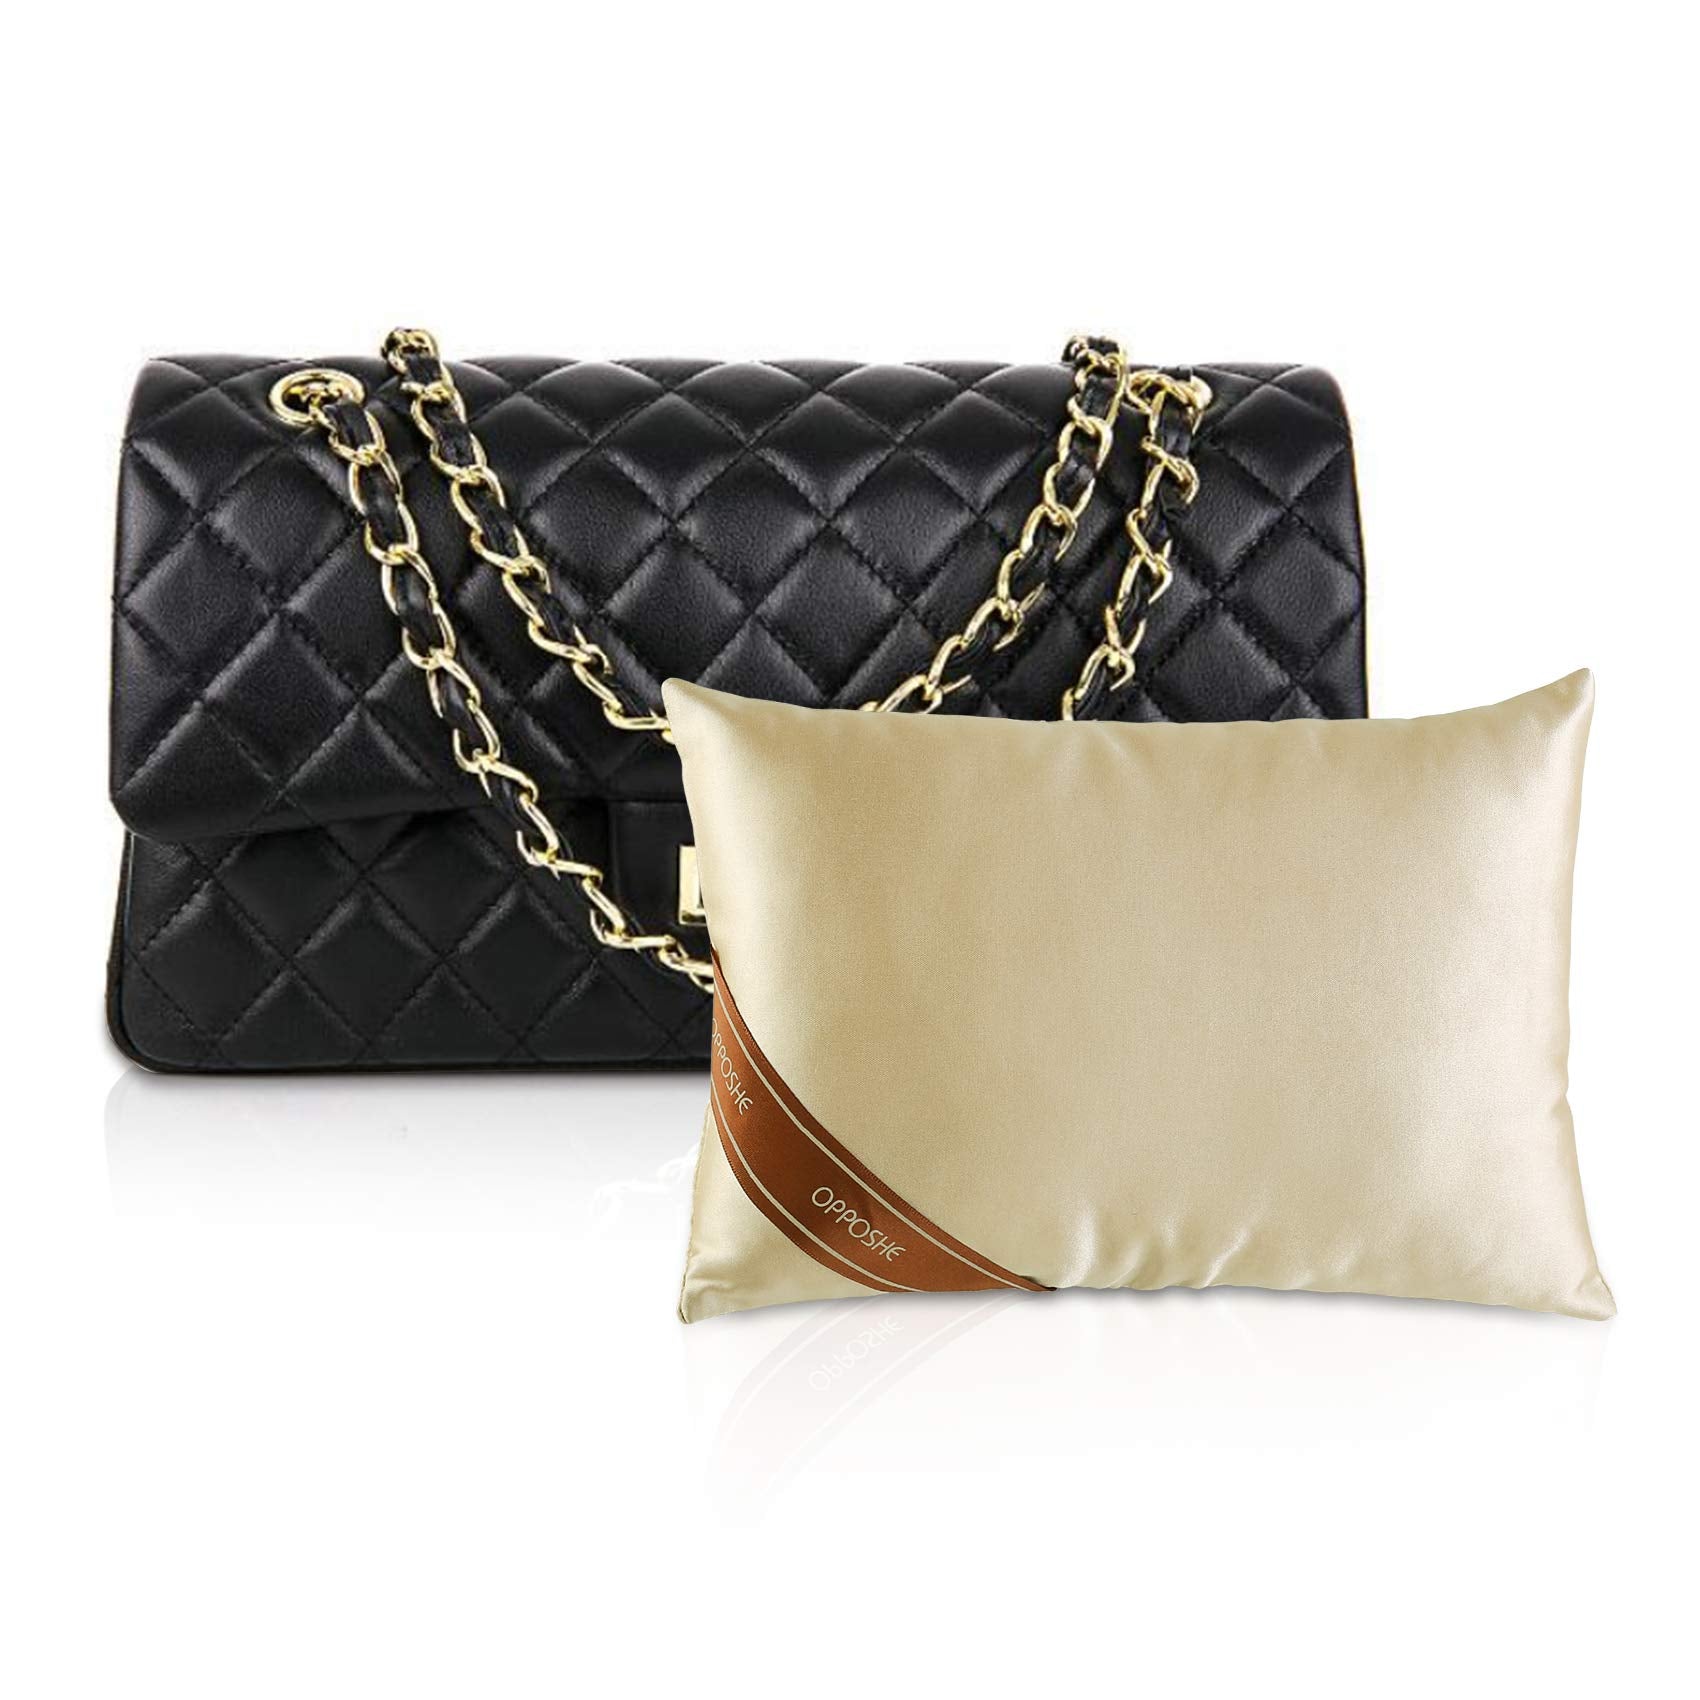 CHANEL, Bags, 27 Chanel Neo Executive Tote